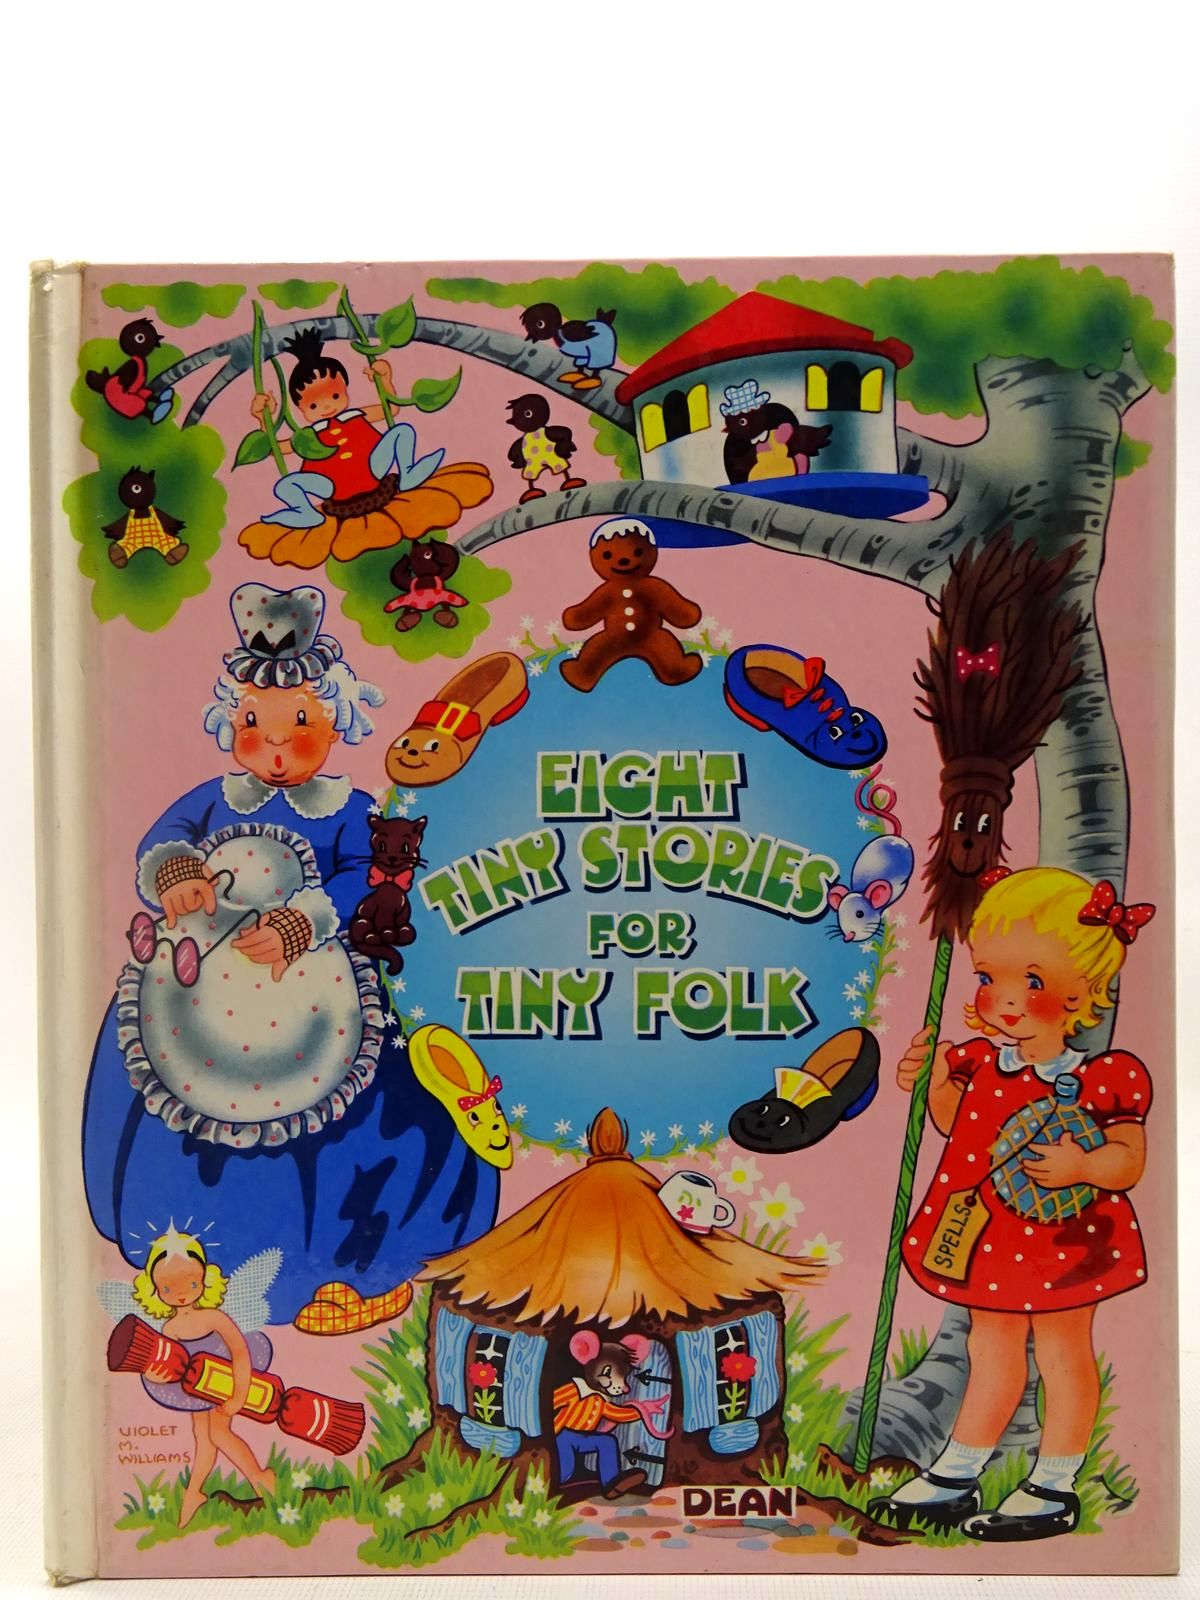 Cover of EIGHT TINY STORIES FOR TINY FOLK by Violet M. Williams